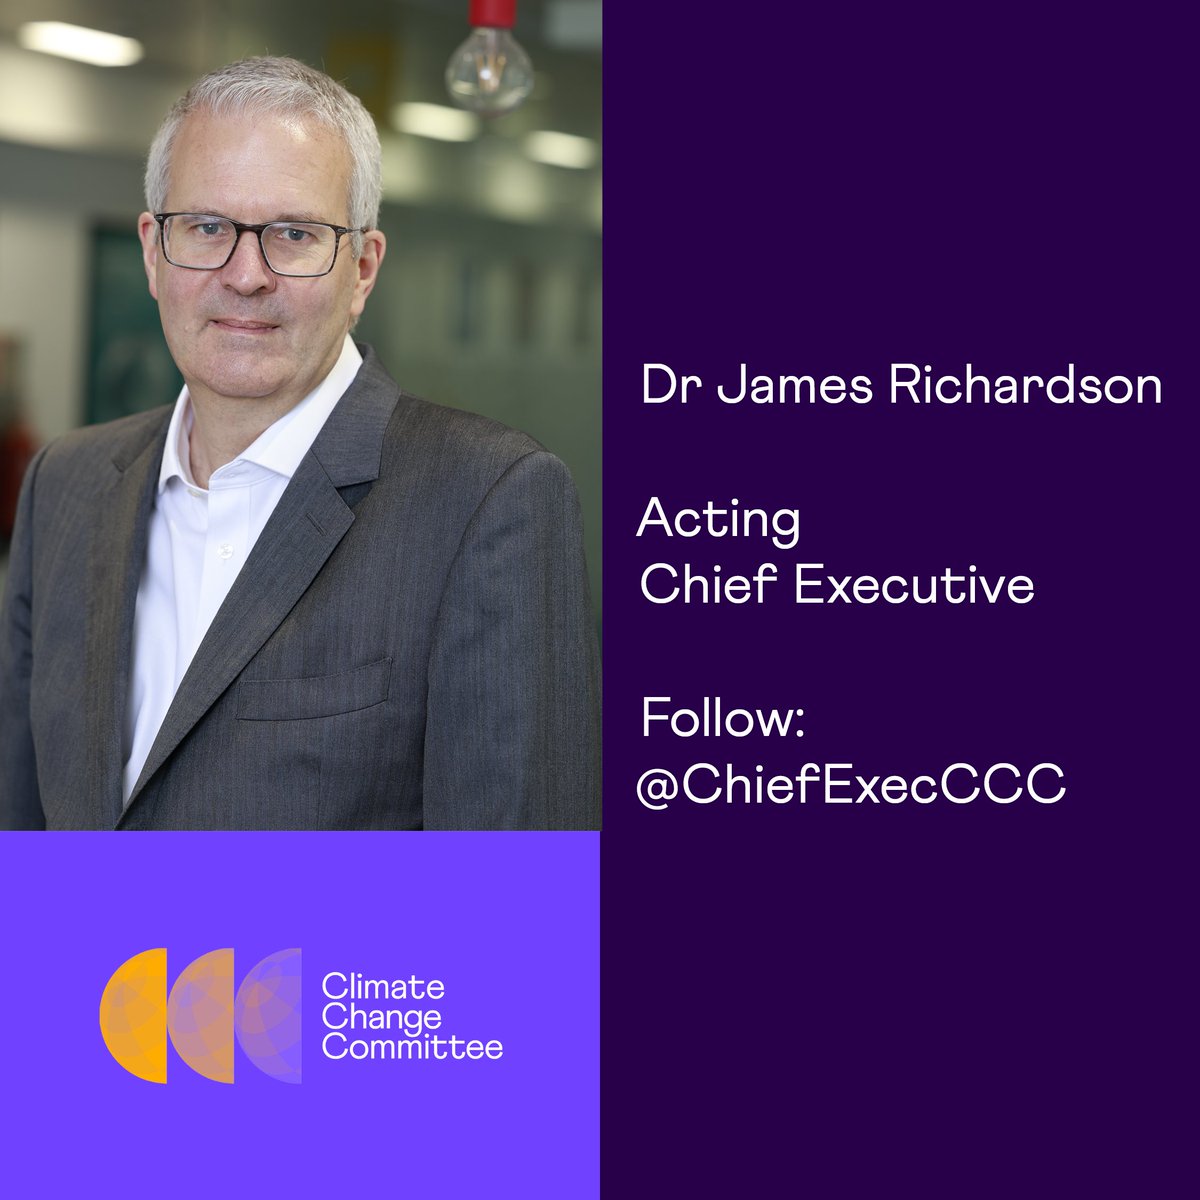 This week Dr James Richardson started in the role of Acting Chief Executive here at the CCC. Until Monday, James has been the Chief Analyst for the organisation. He is now posting from @ChiefExecCCC. Follow him for future updates and insights on our work.